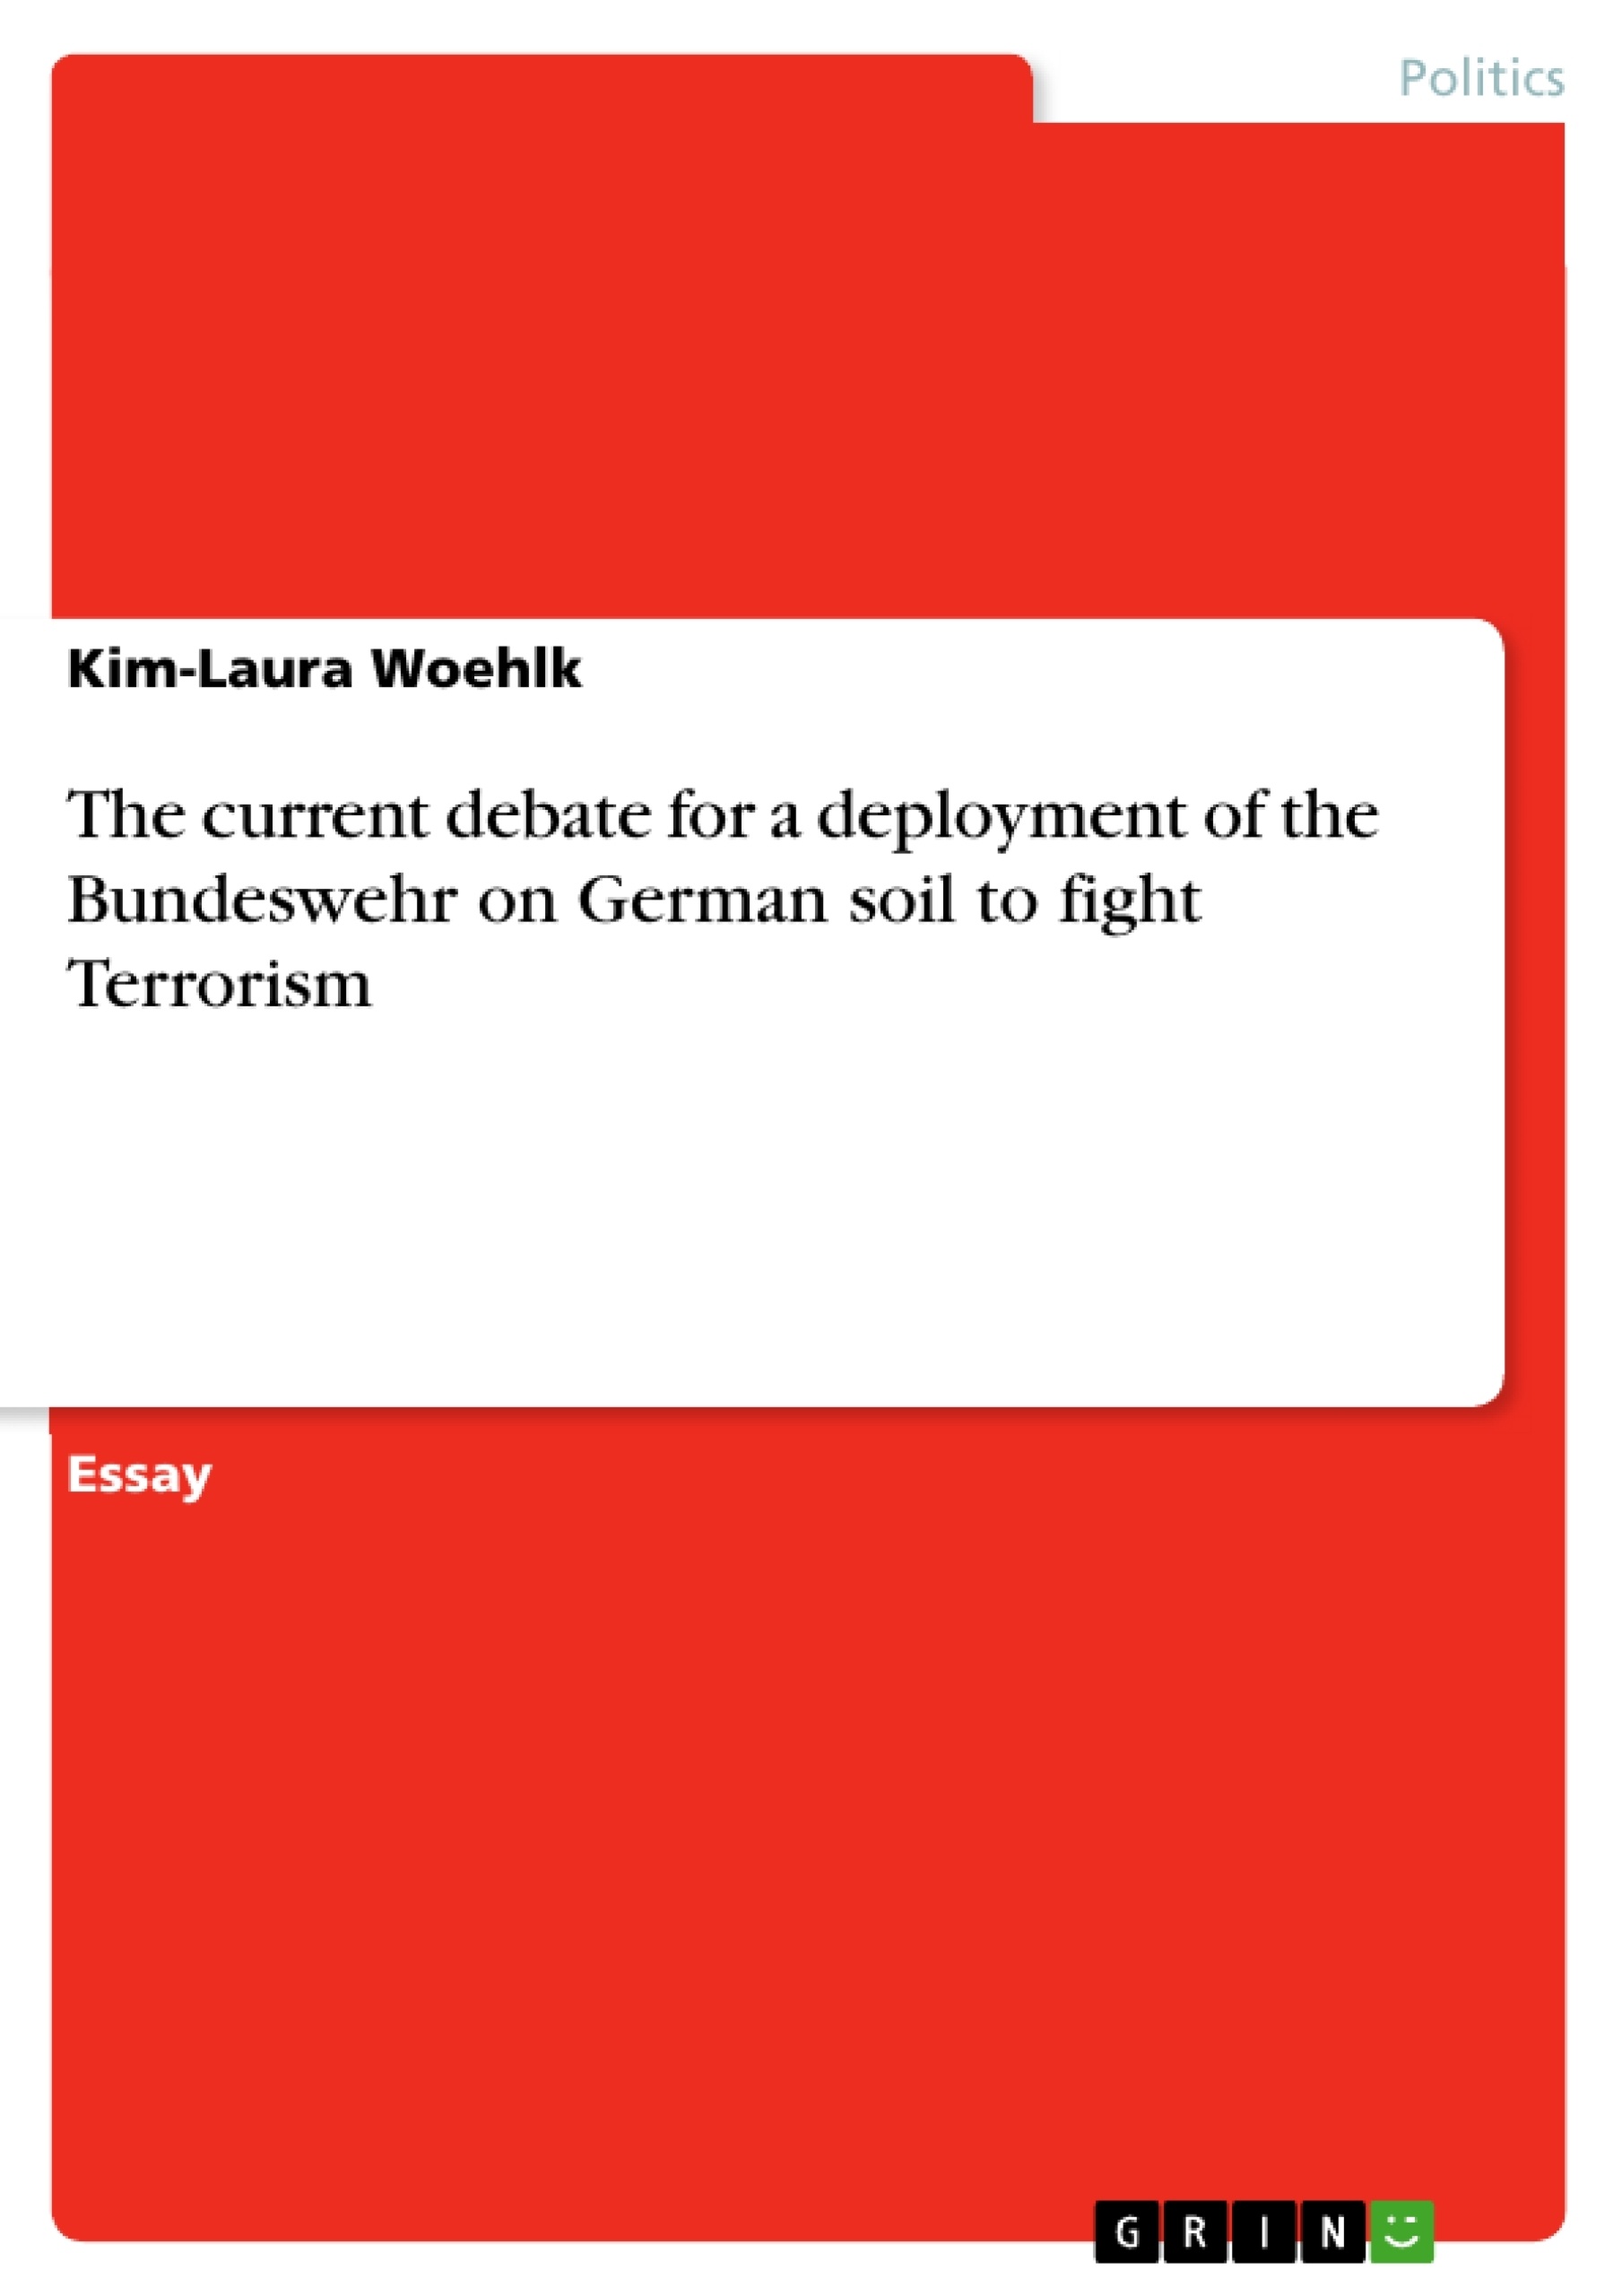 Title: The current debate for a deployment of the Bundeswehr on German soil to fight Terrorism